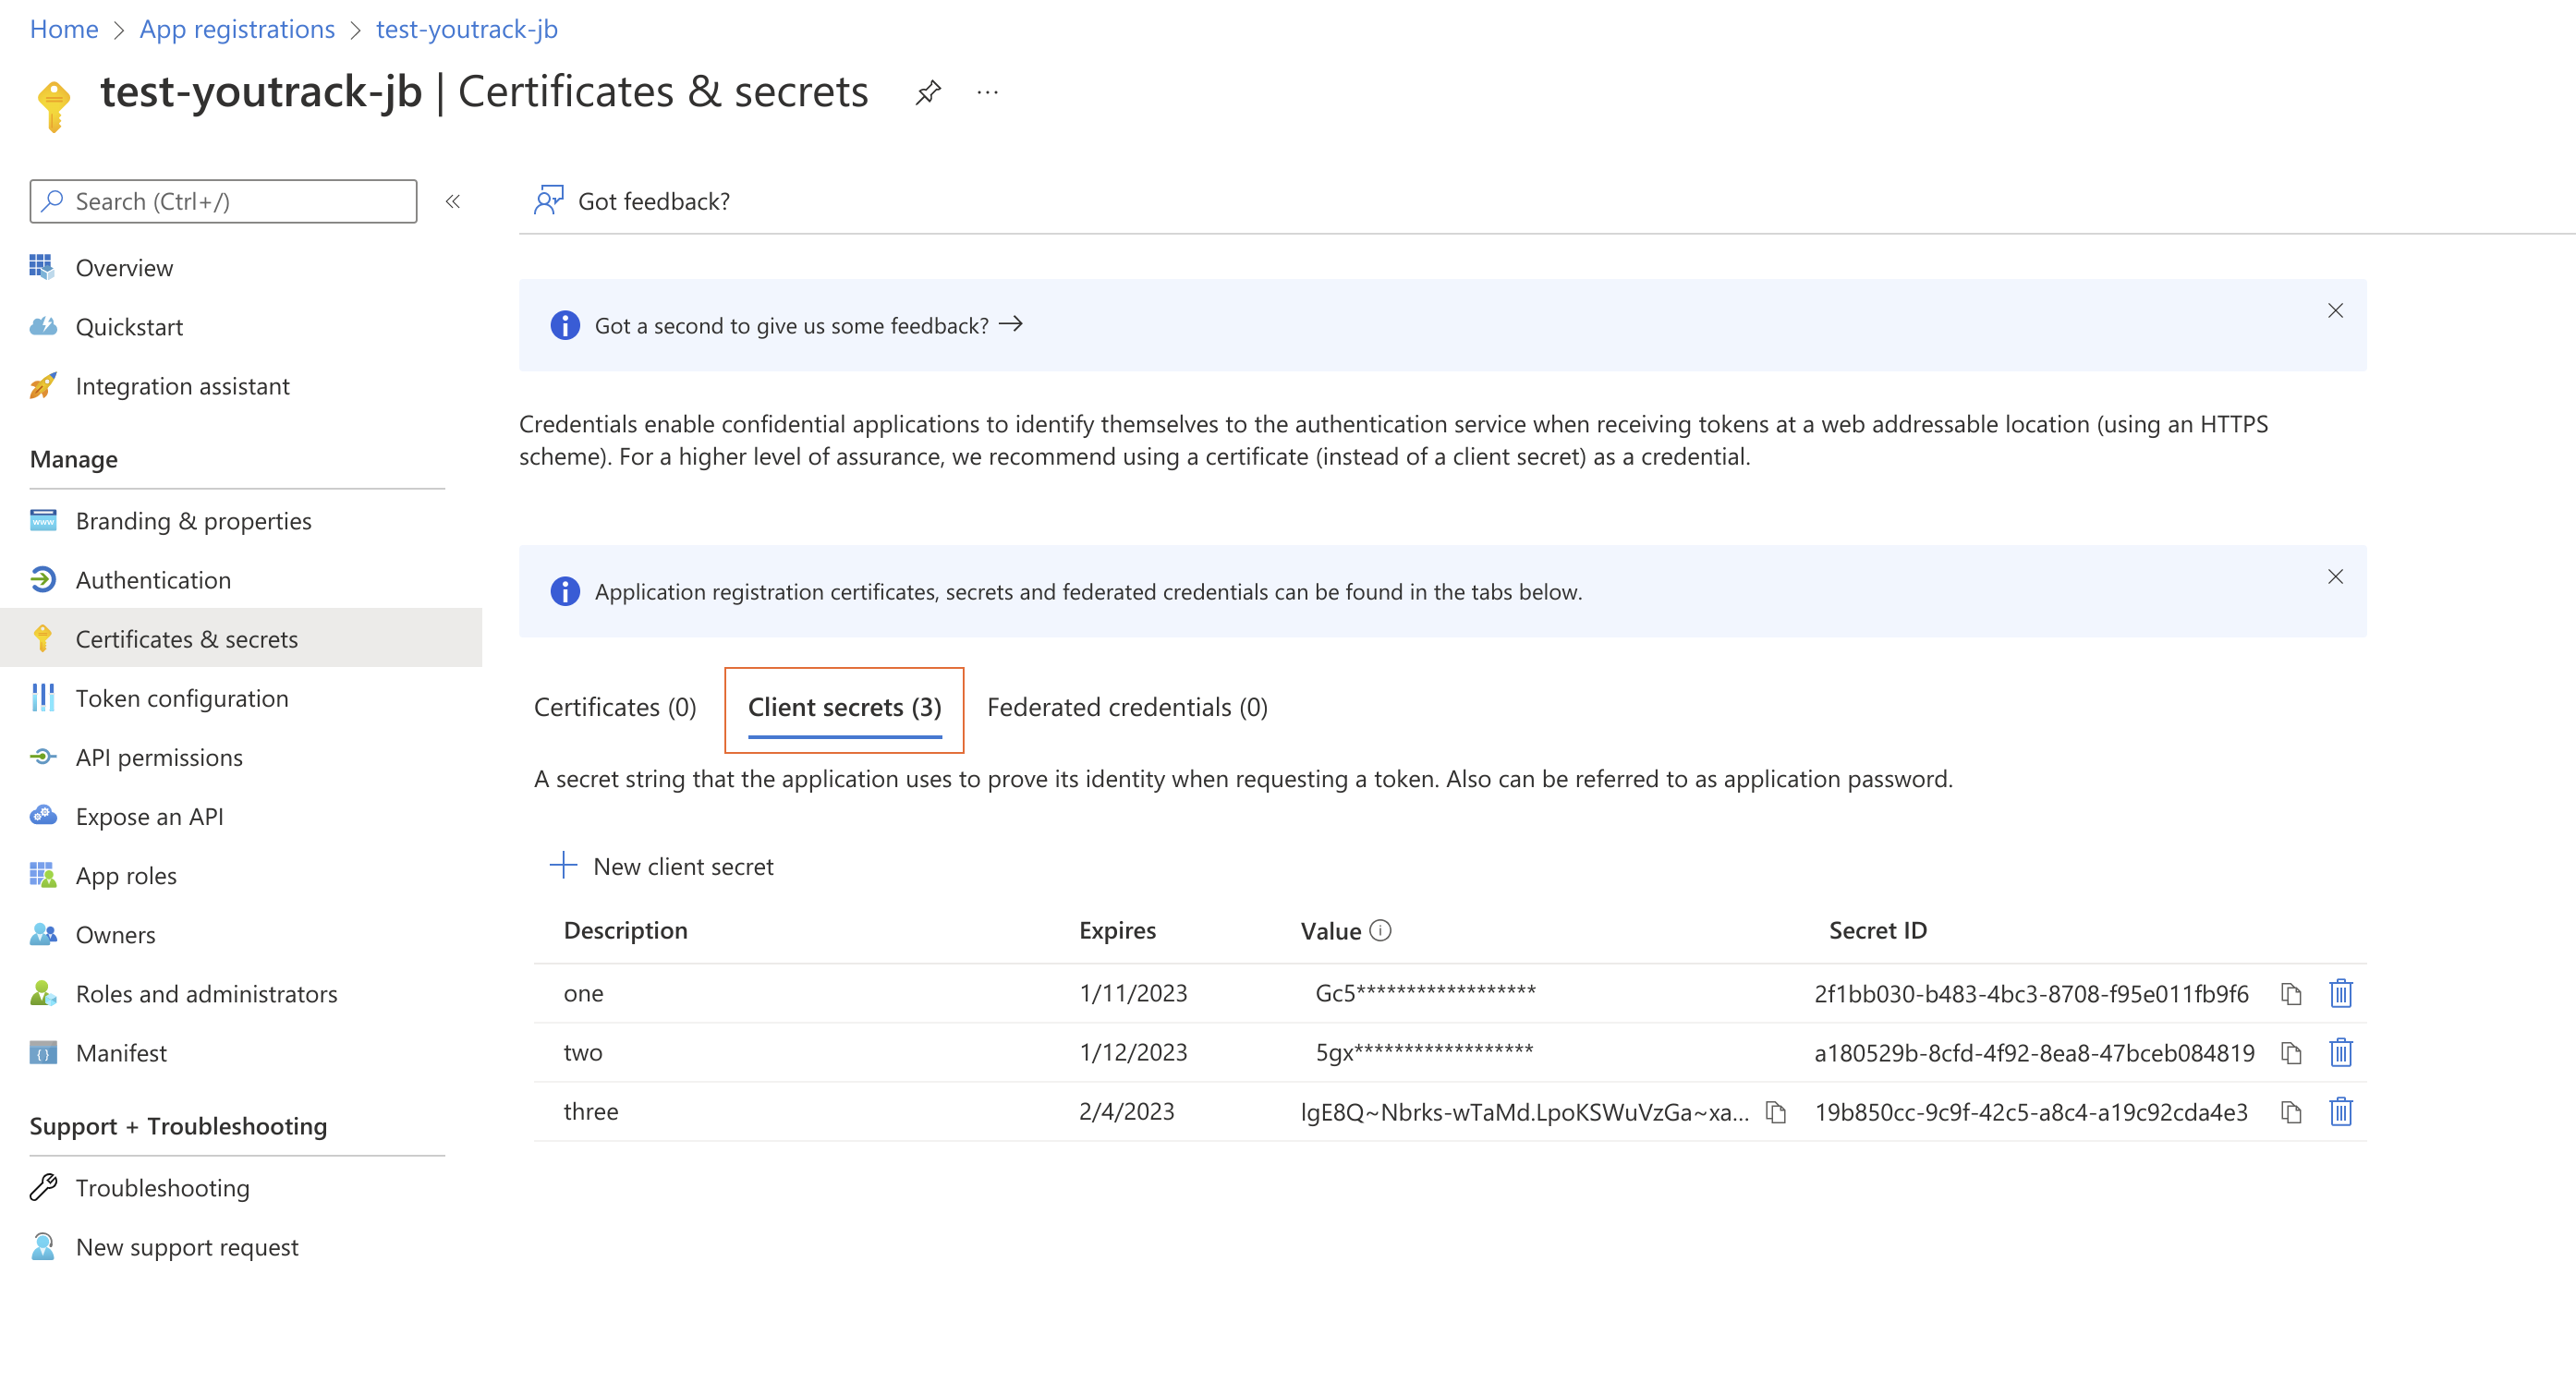 The Certificates & secrets section of a registered client application in Microsoft Azure.